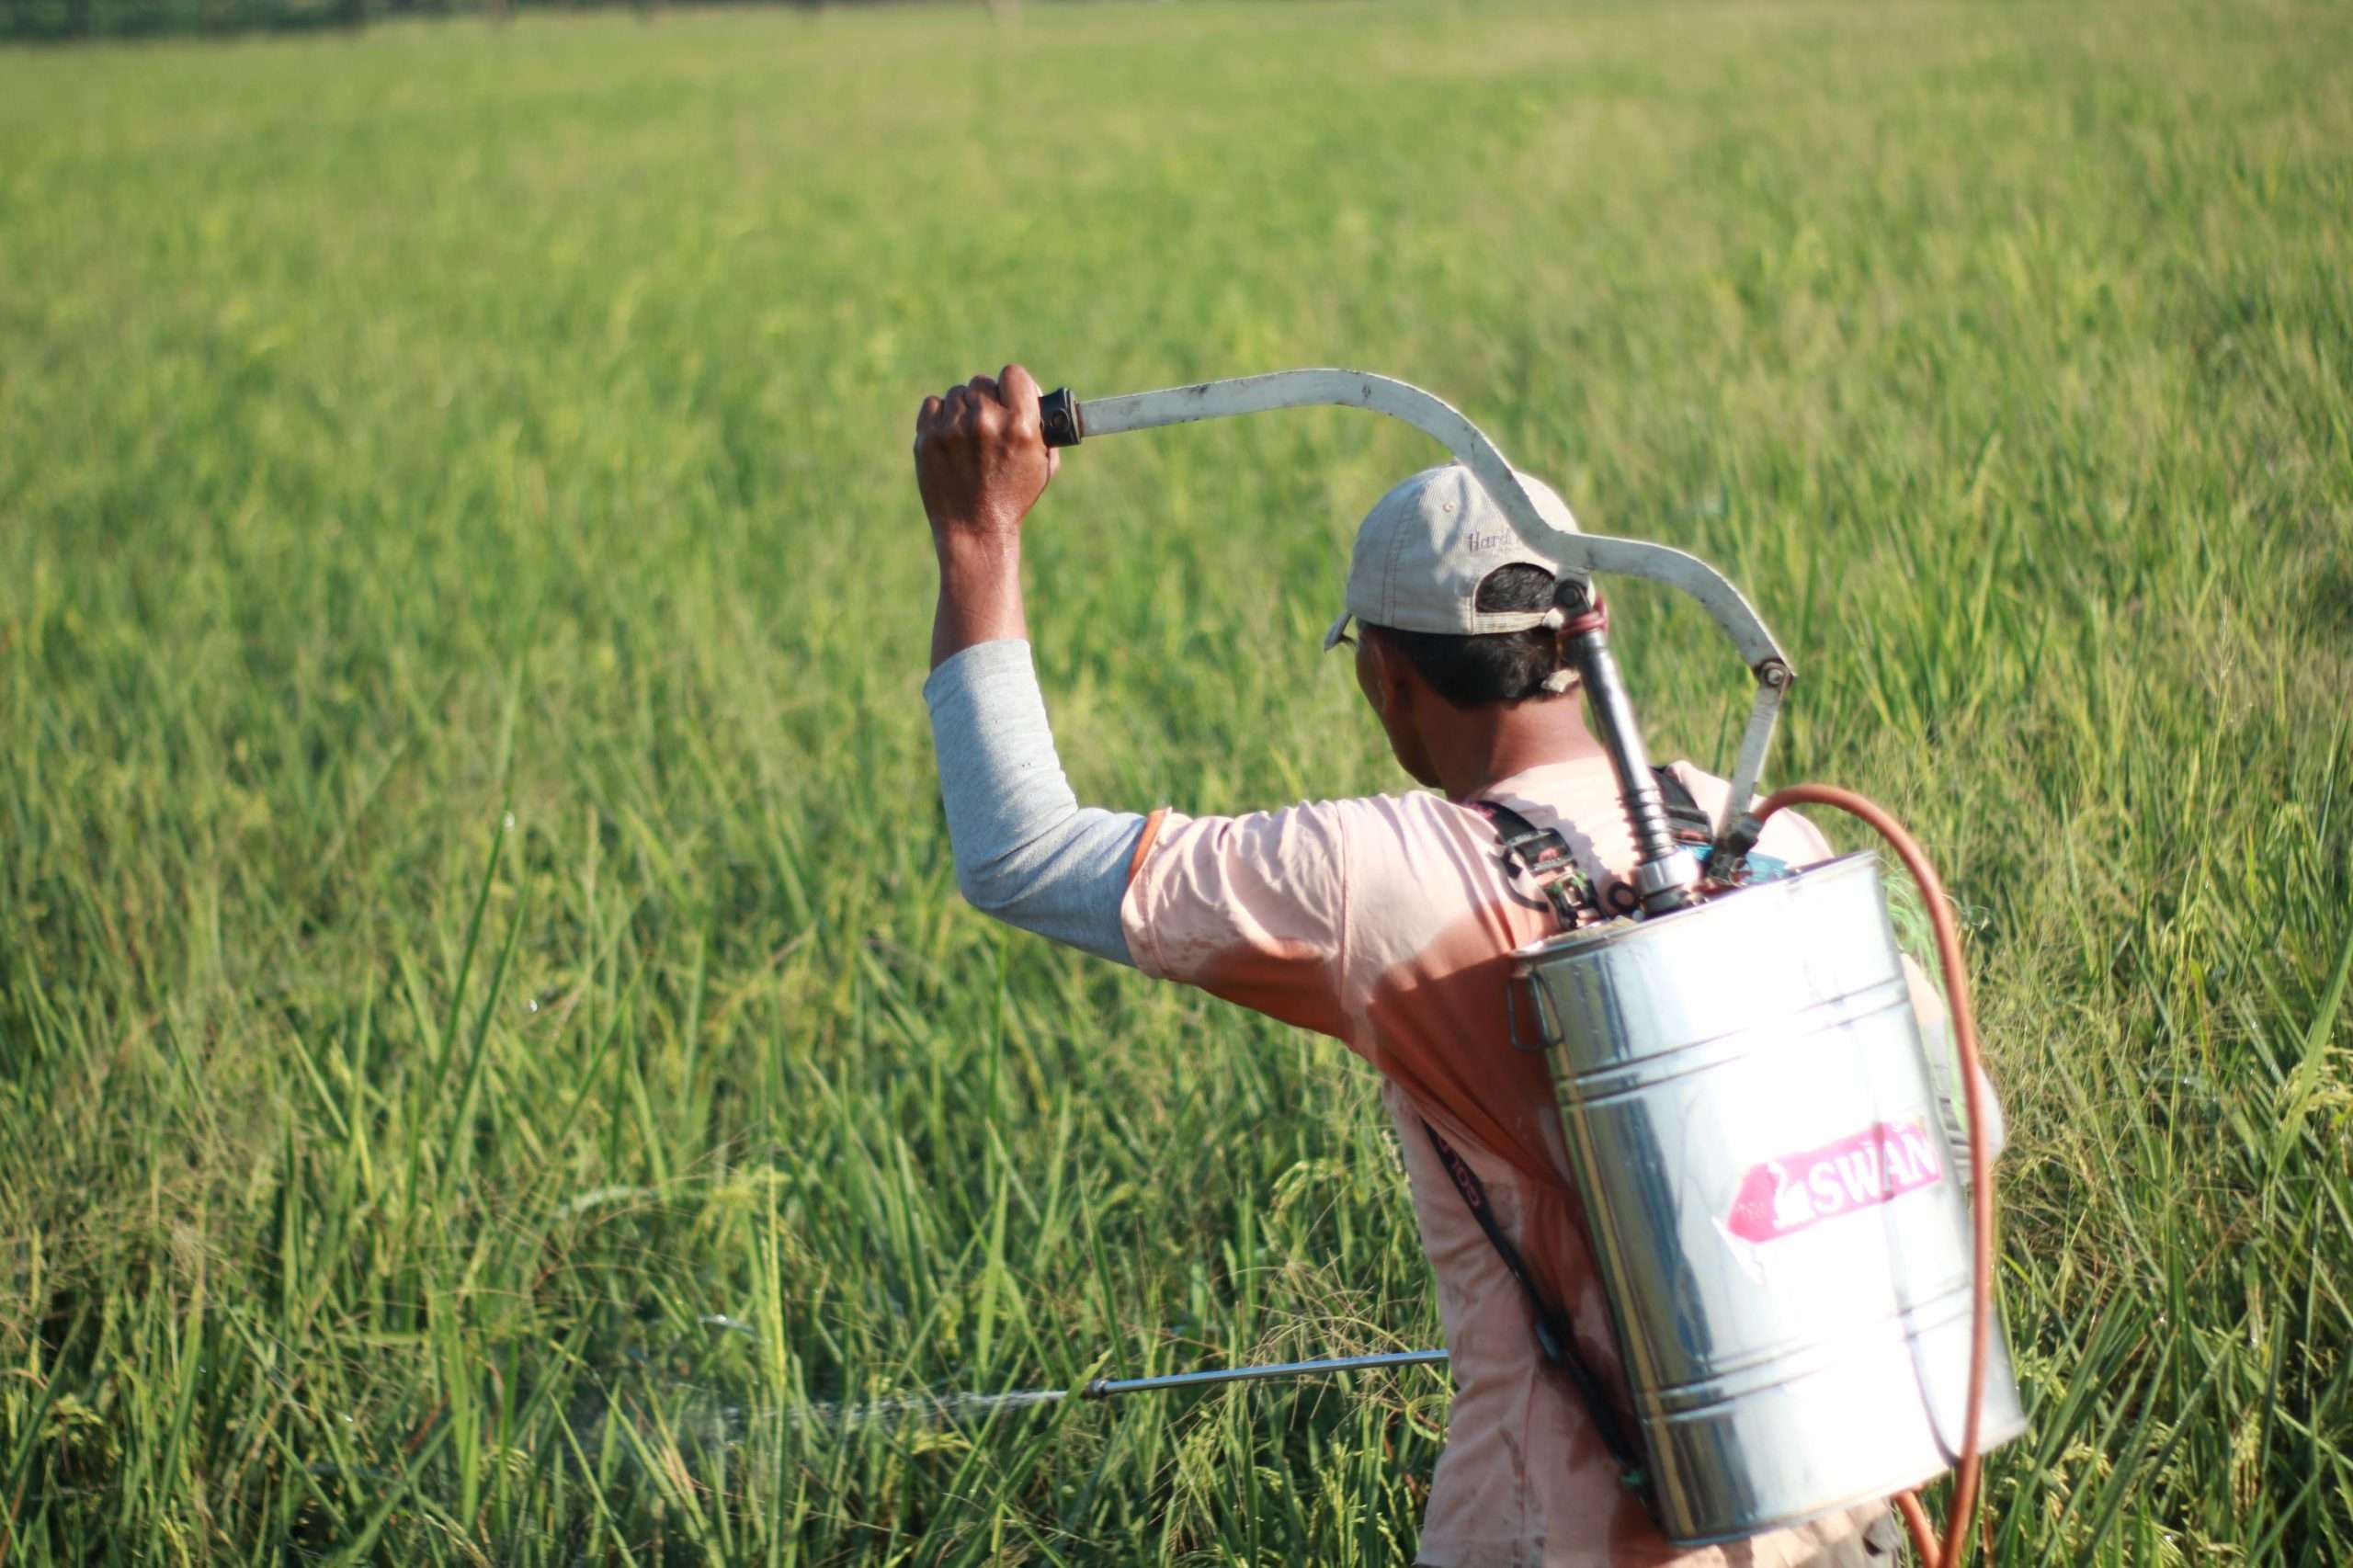 Tackling the widespread use of harmful pesticides is crucial to achieving sustainable farming.